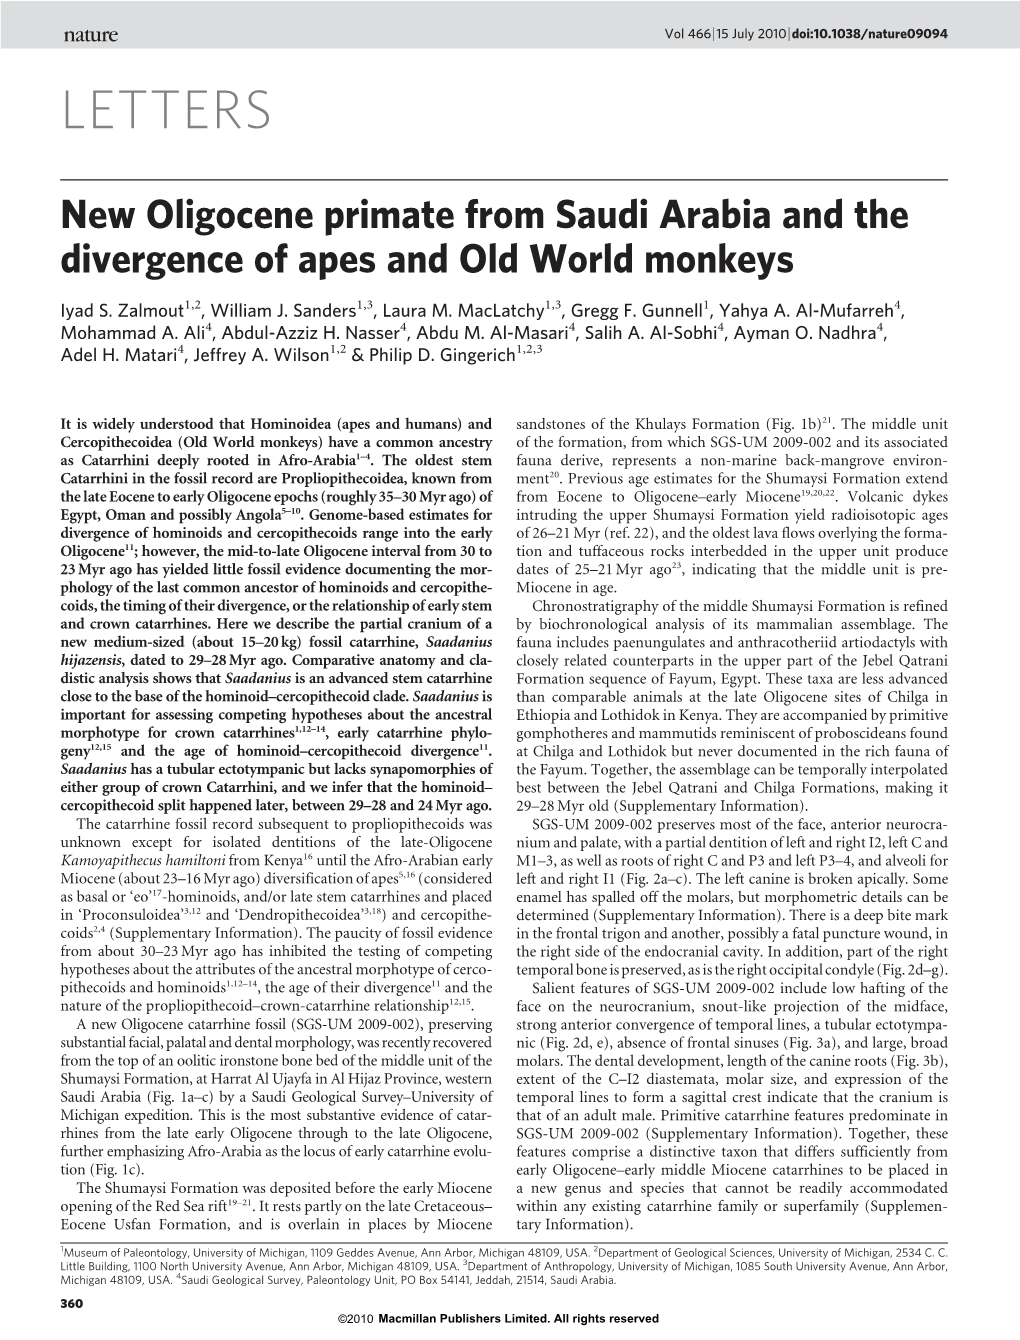 New Oligocene Primate from Saudi Arabia and the Divergence of Apes and Old World Monkeys